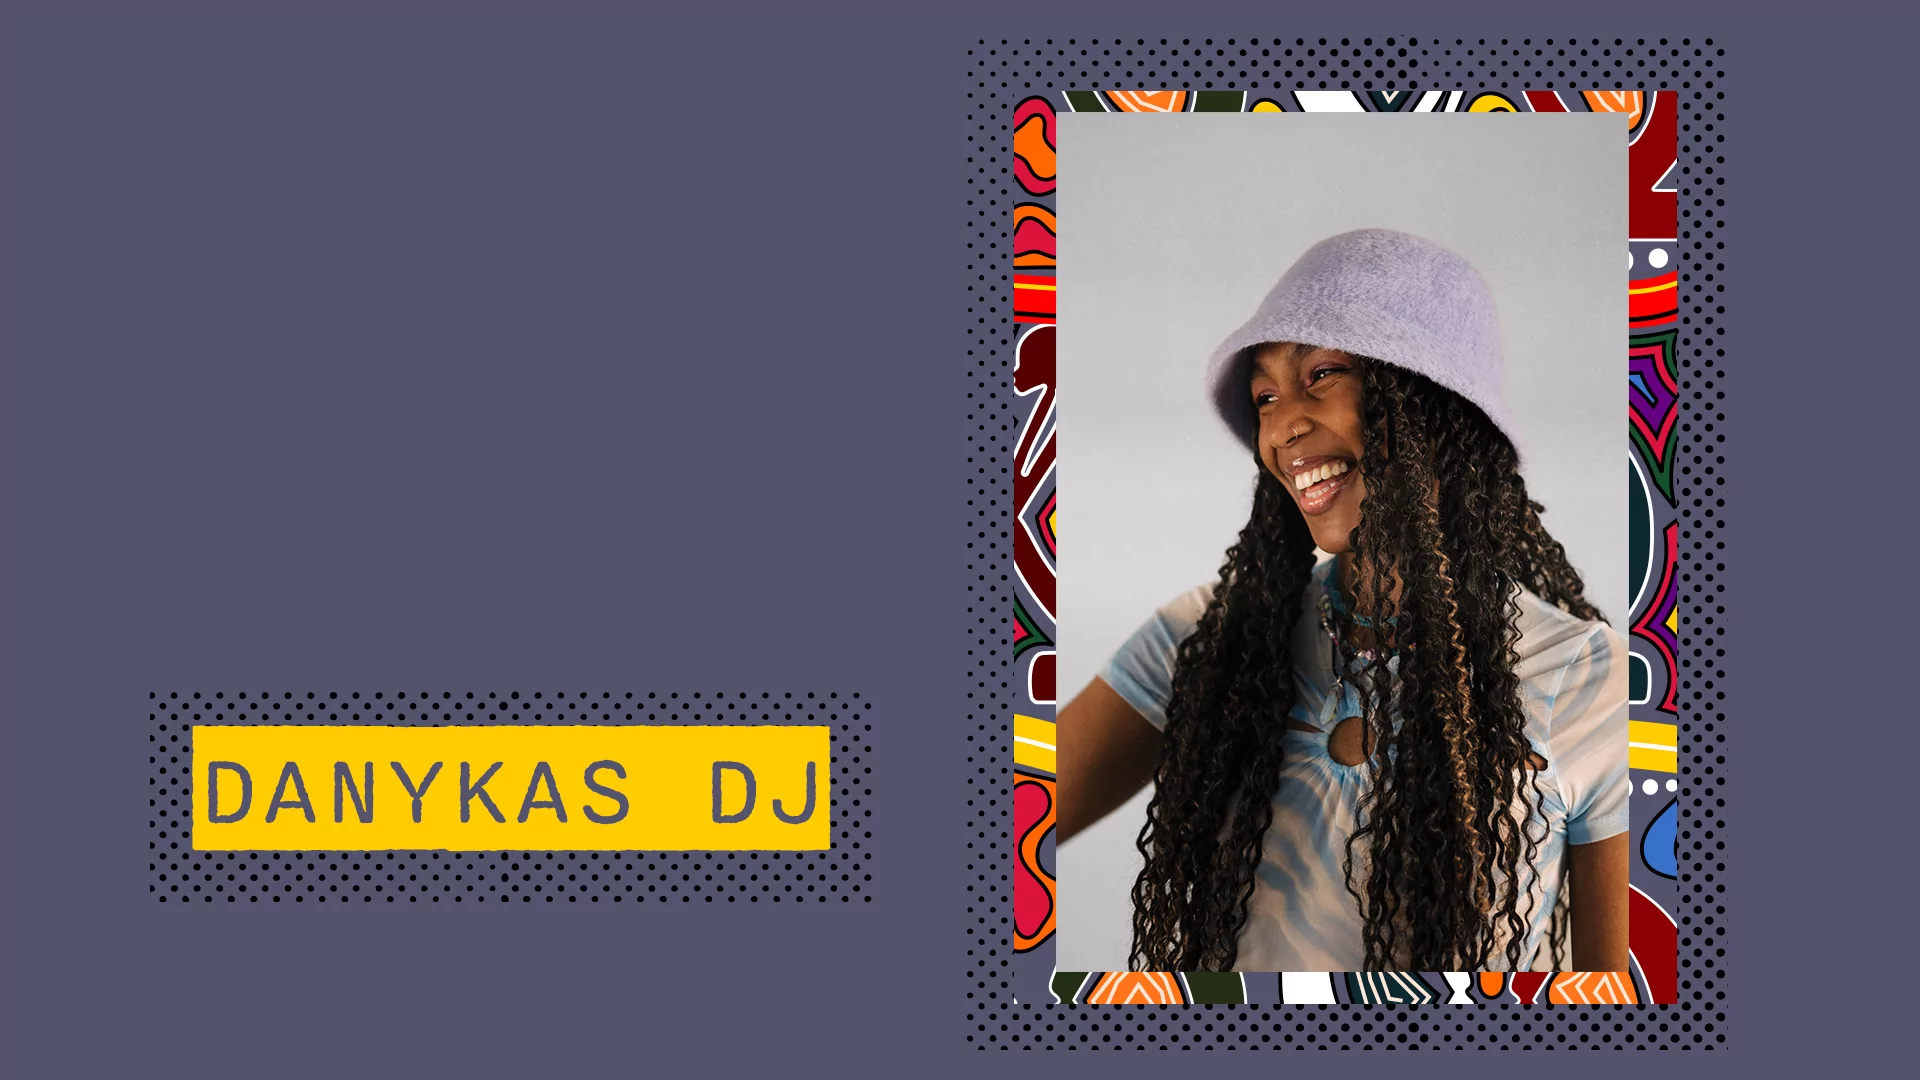 Purple collage featuring an image of DANYKAS DJ wearing a bucket hat and her name in yellow block font